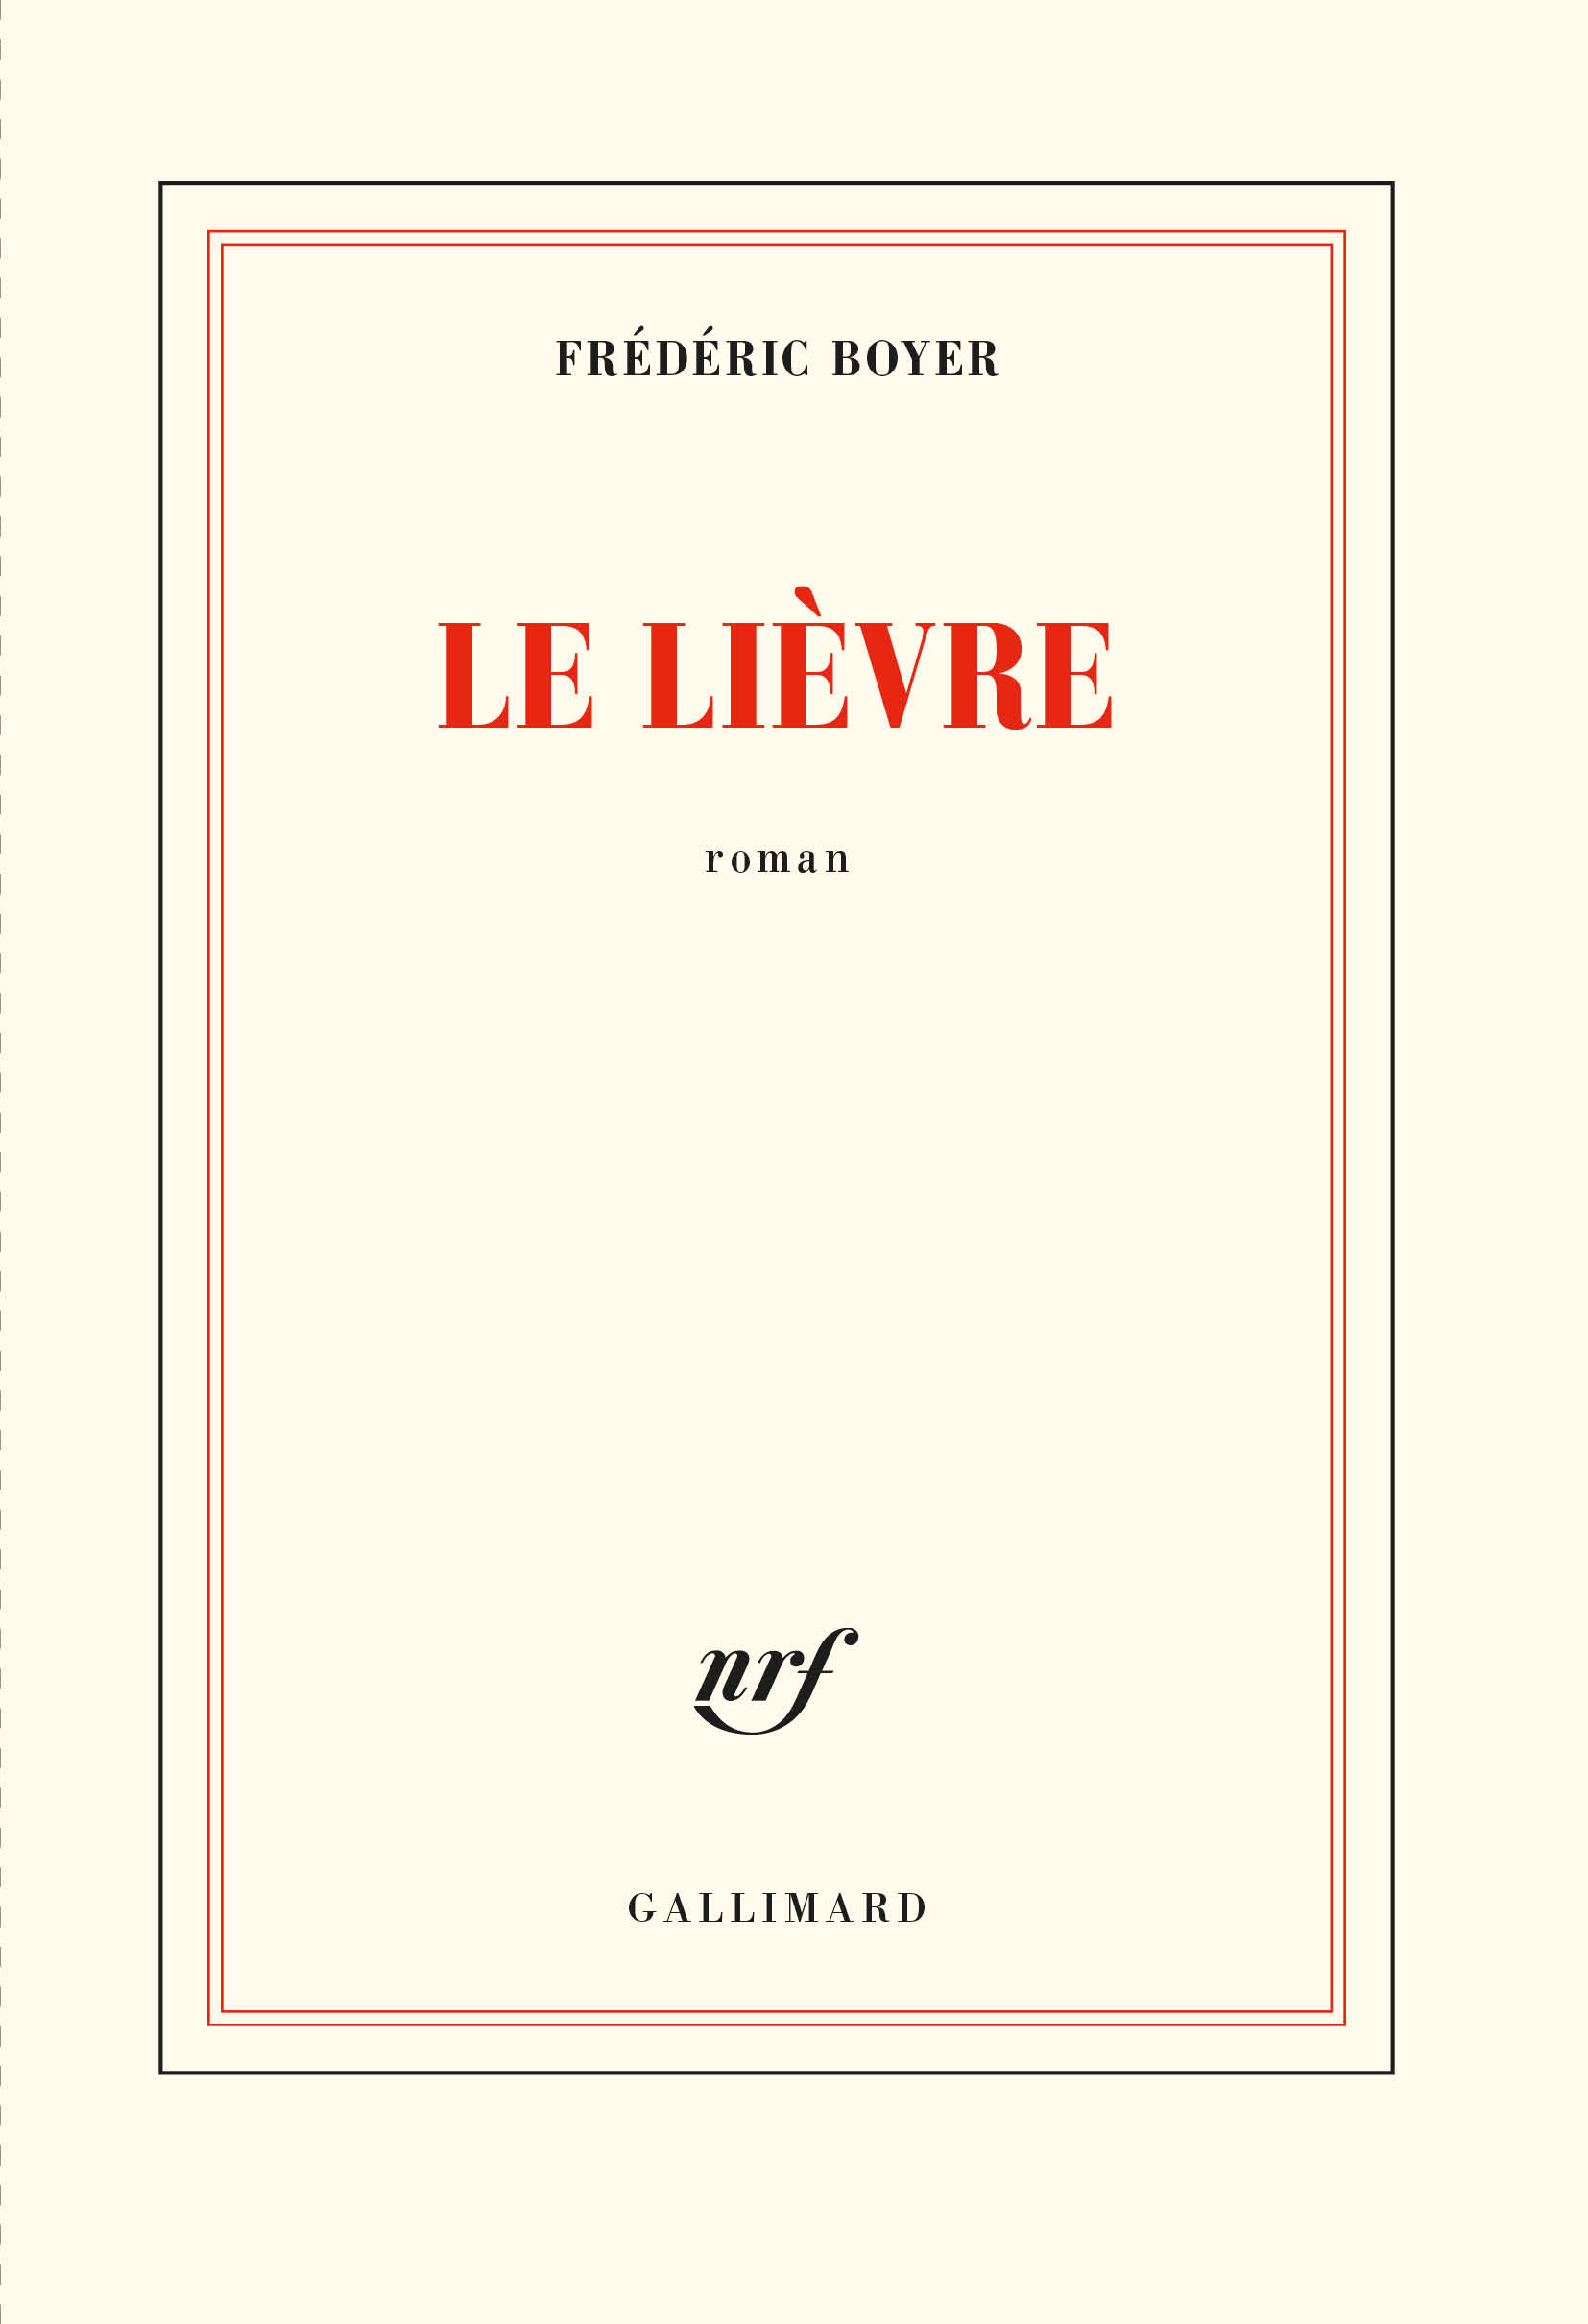 Le lièvre Frederic Boyer Gallimard